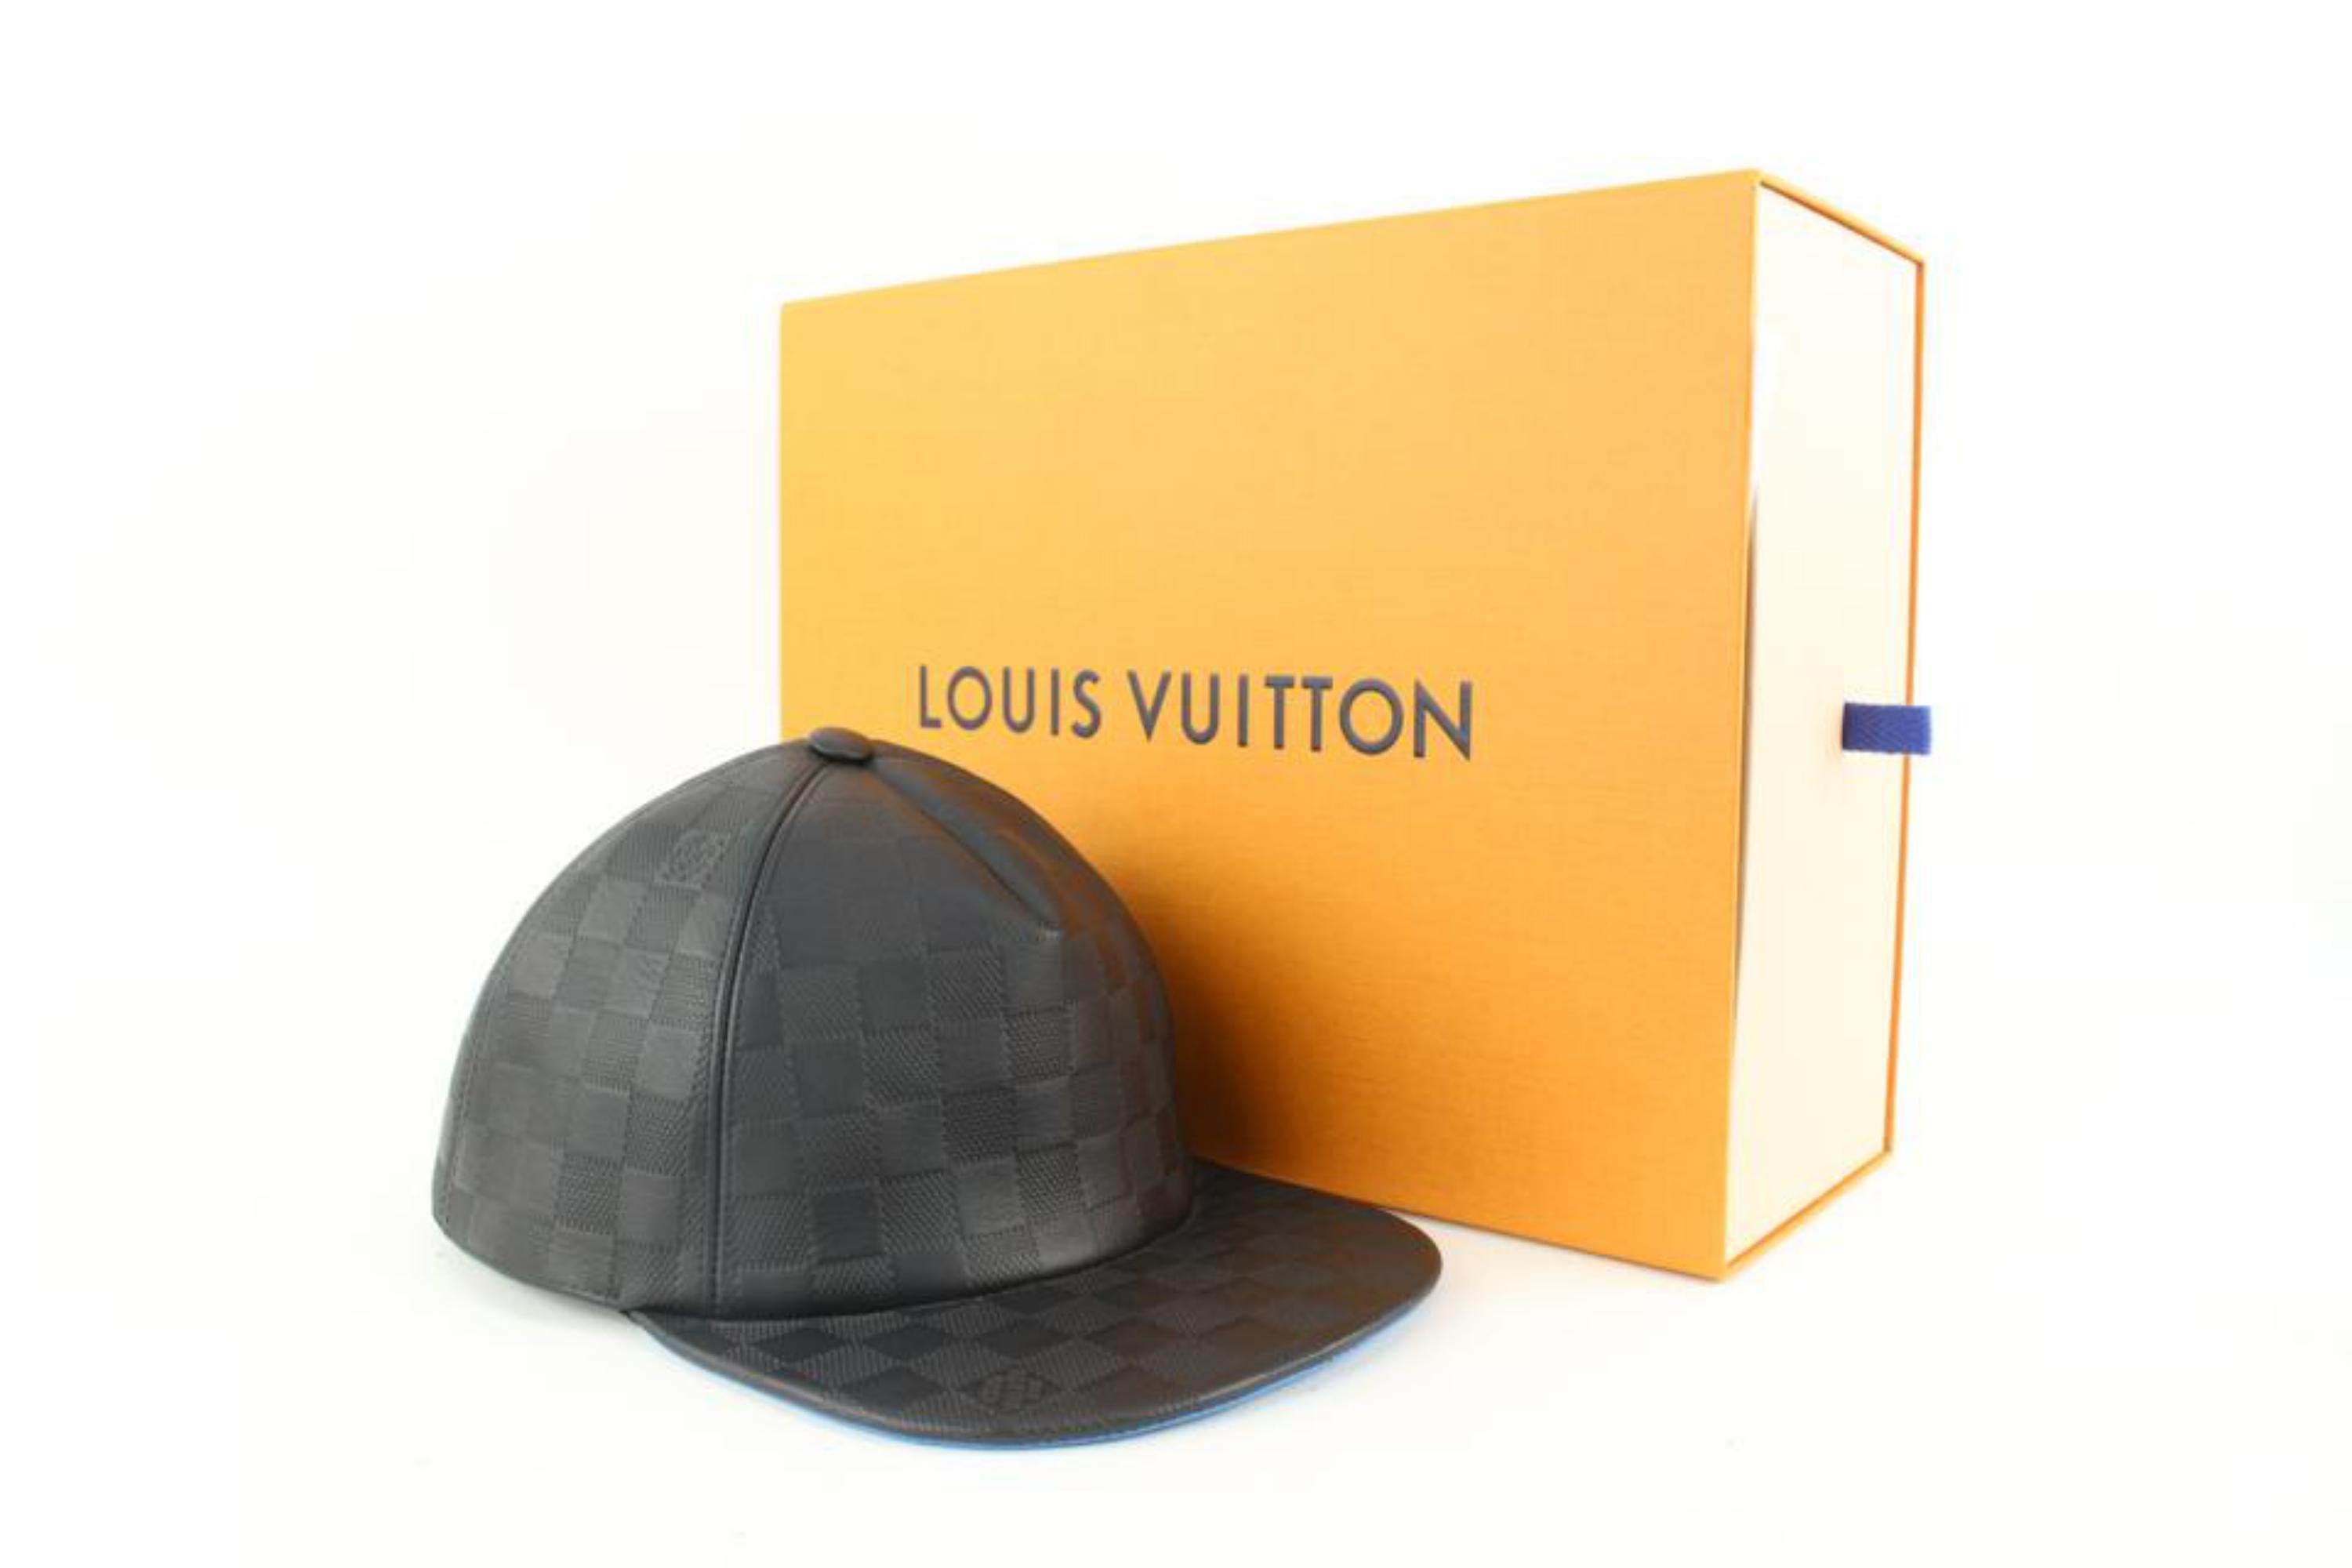 Louis Vuitton 21FW Black x Blue Leather Damier Infini Baseball Cap Hat 16lv45
Date Code/Serial Number: AL0230 M76562
Made In: Italy
Measurements: Length:  8